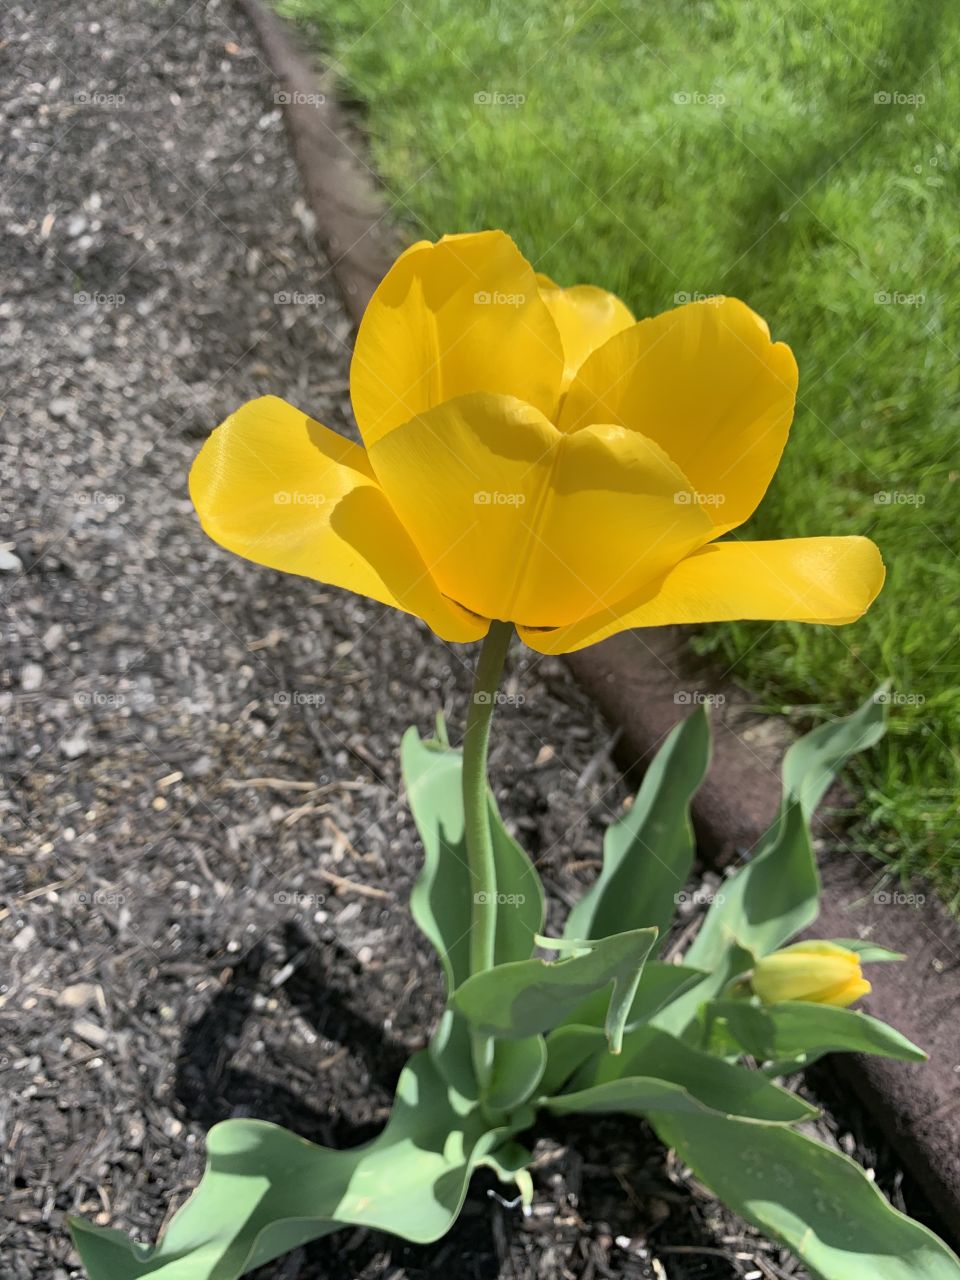 The side view of a yellow tulip just as spring begins, bringing hope for nicer weather with it!